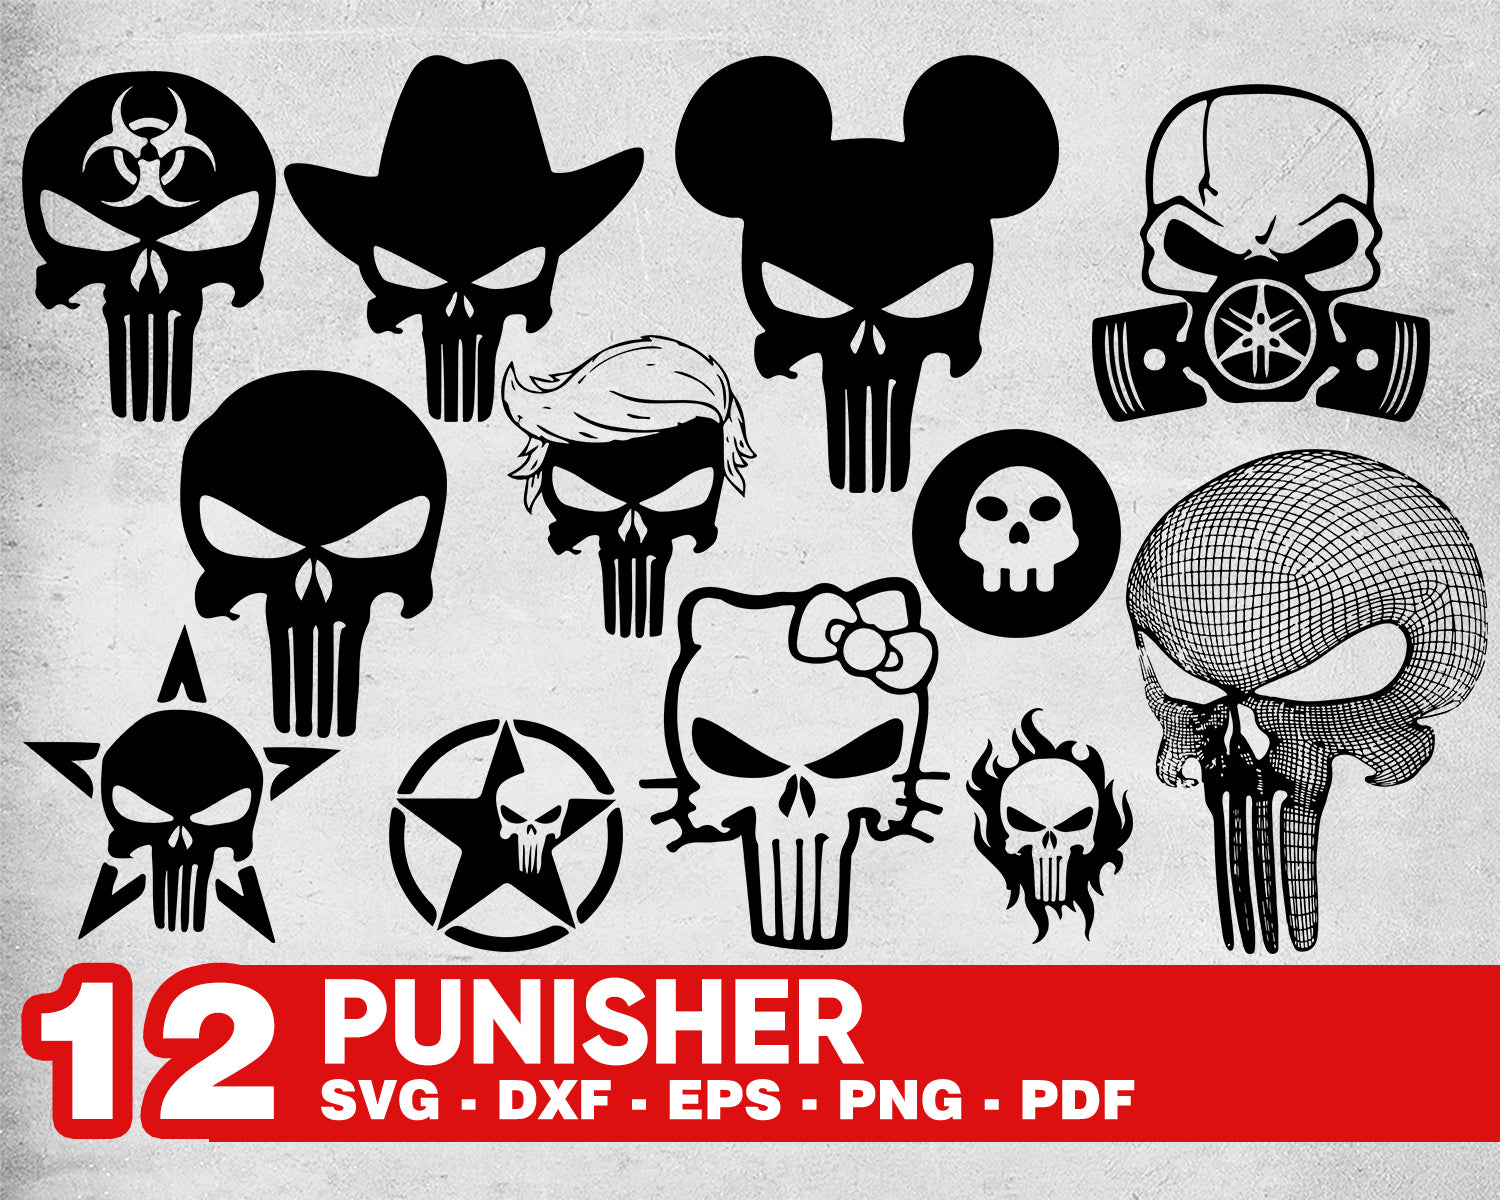 Get Free Punisher Svg Files Pics Free Svg Files Silhouette And Cricut